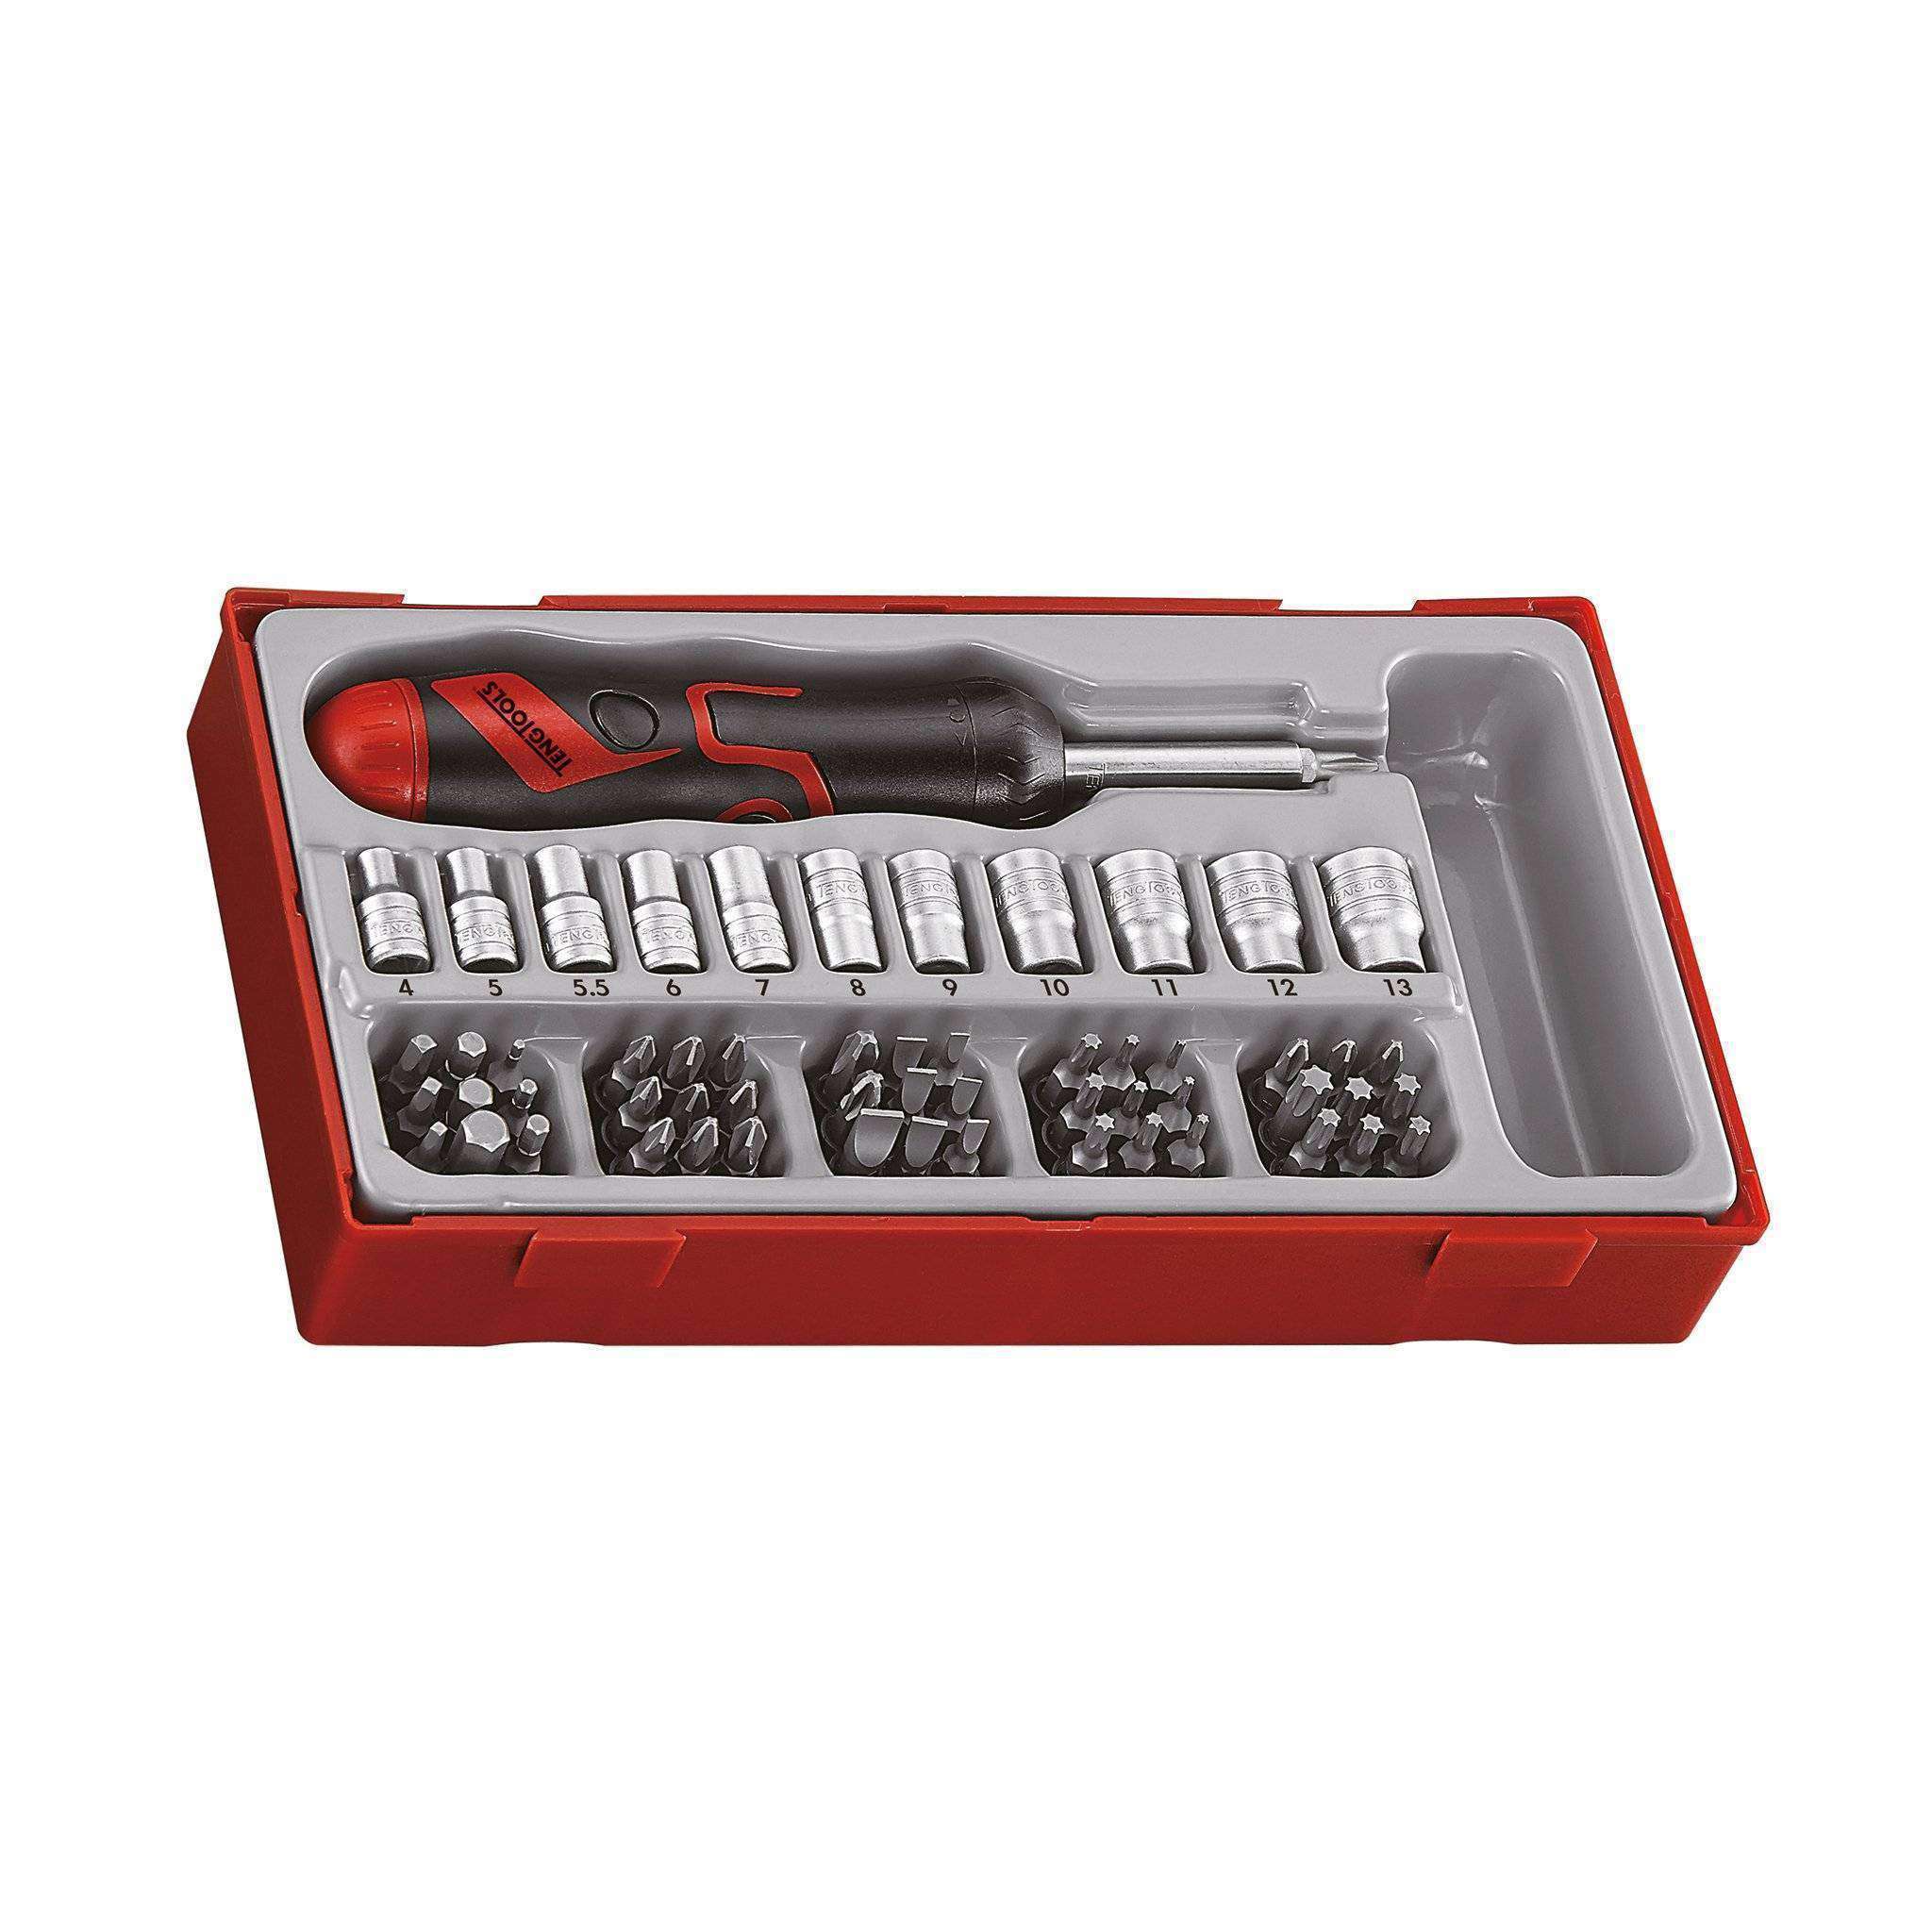 Teng Tools 64 Piece 1/4 Inch Drive Angled Ratcheting Bits, Sockets And Driver Set - TTMDRT64